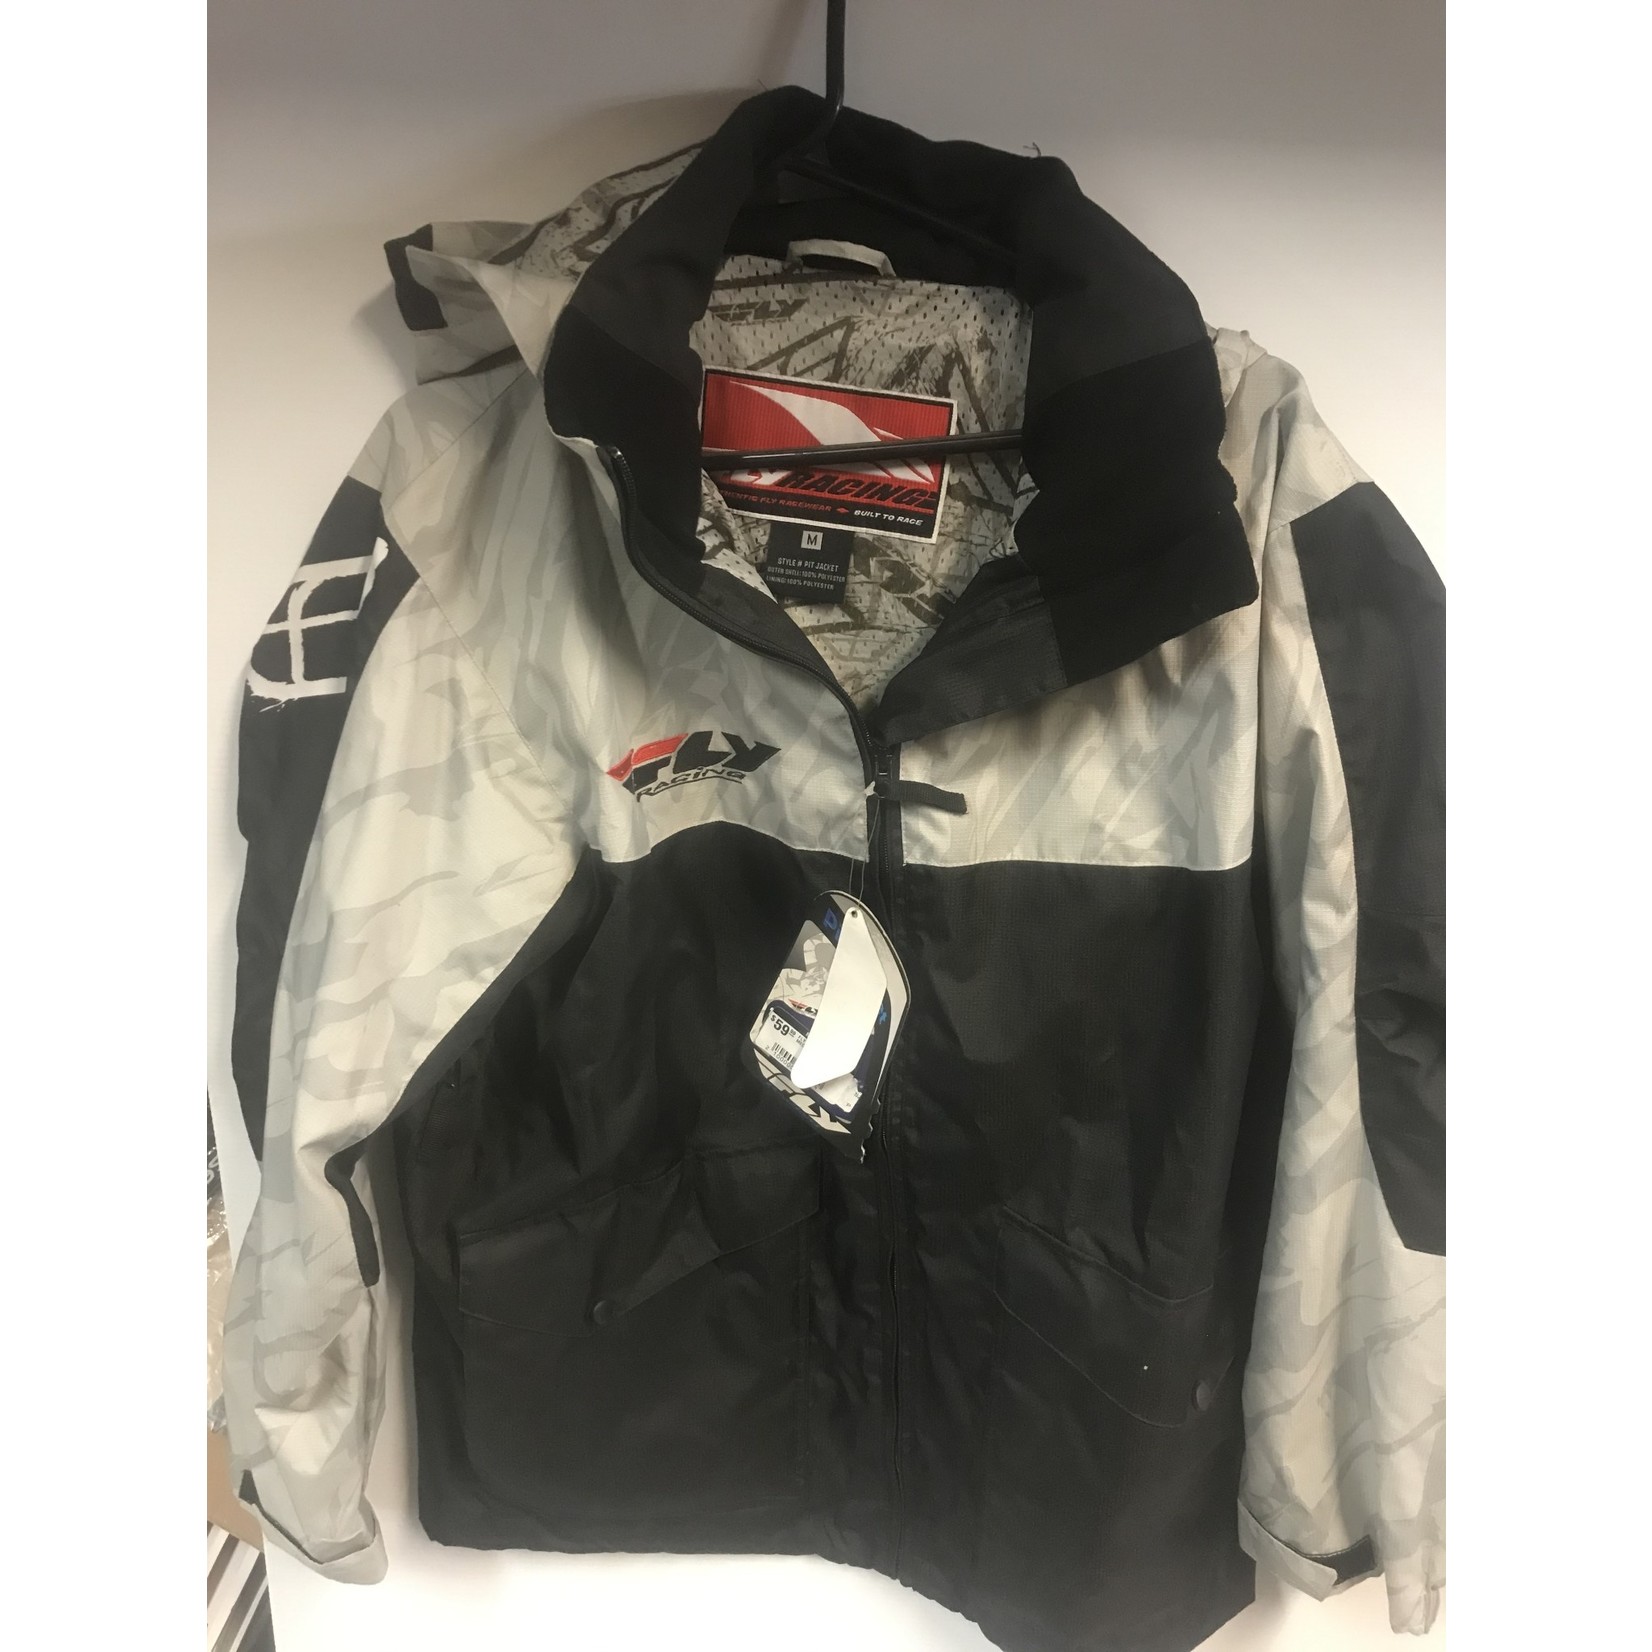 FLY RACING FLY PIT JKT BLK/GRY MEDIUM